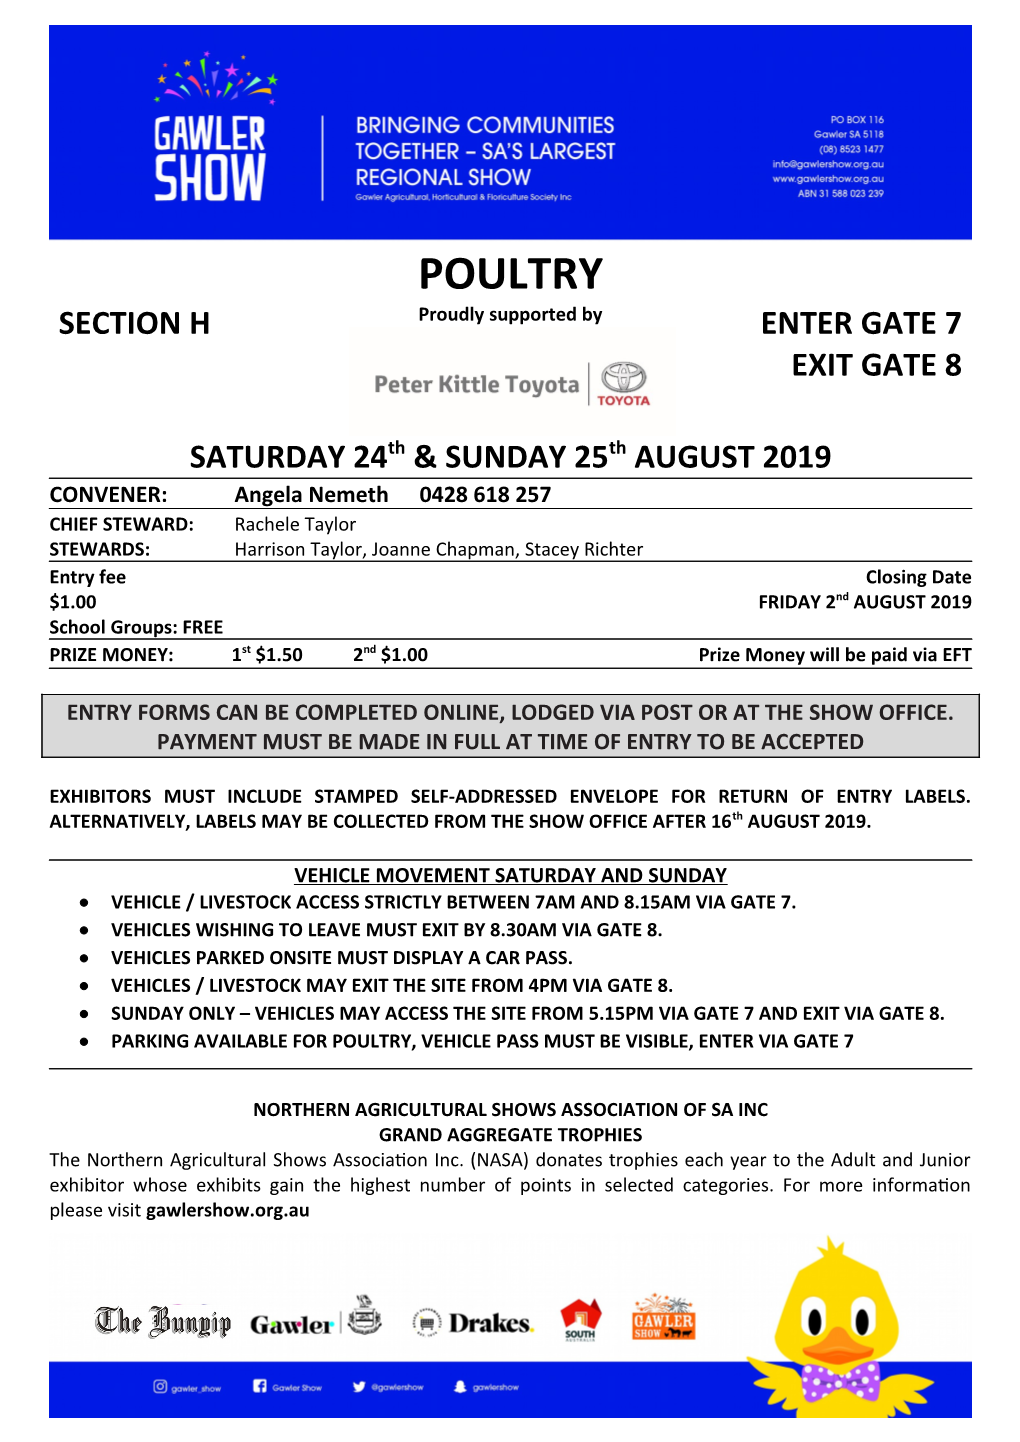 POULTRY SECTION H Proudly Supported by ENTER GATE 7 EXIT GATE 8